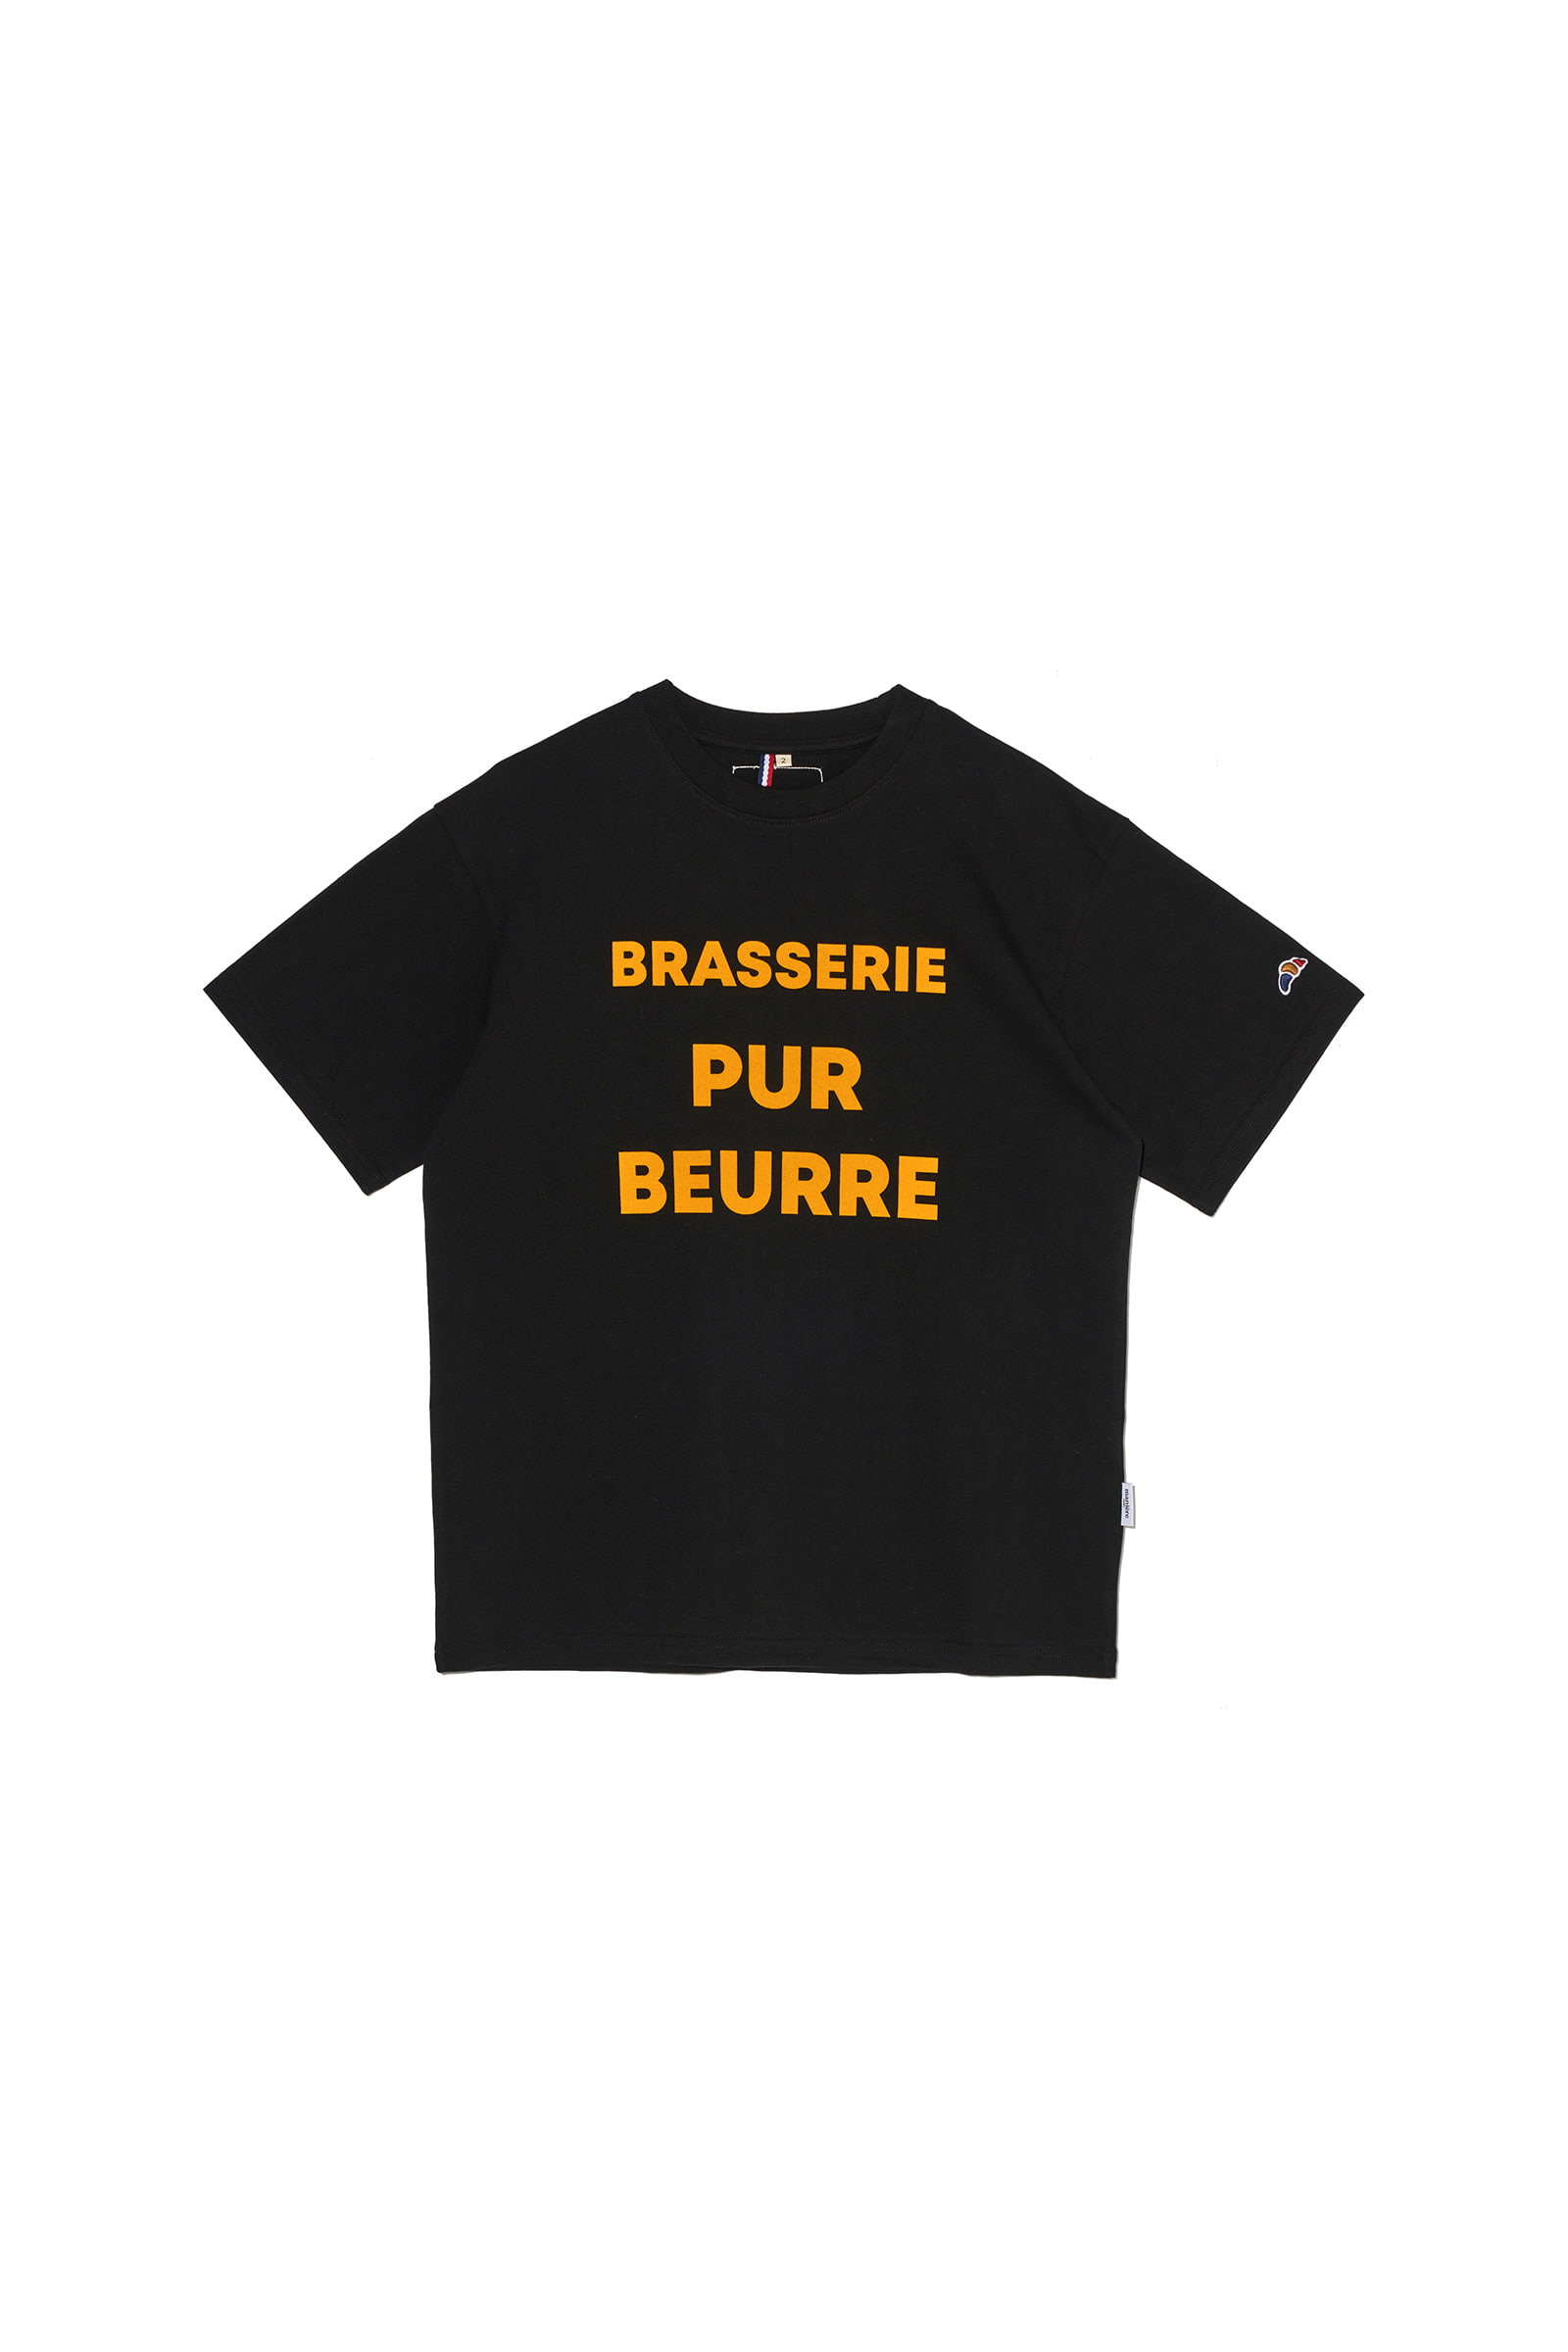 ep.6 Pur Beurre T-shirts (Black)